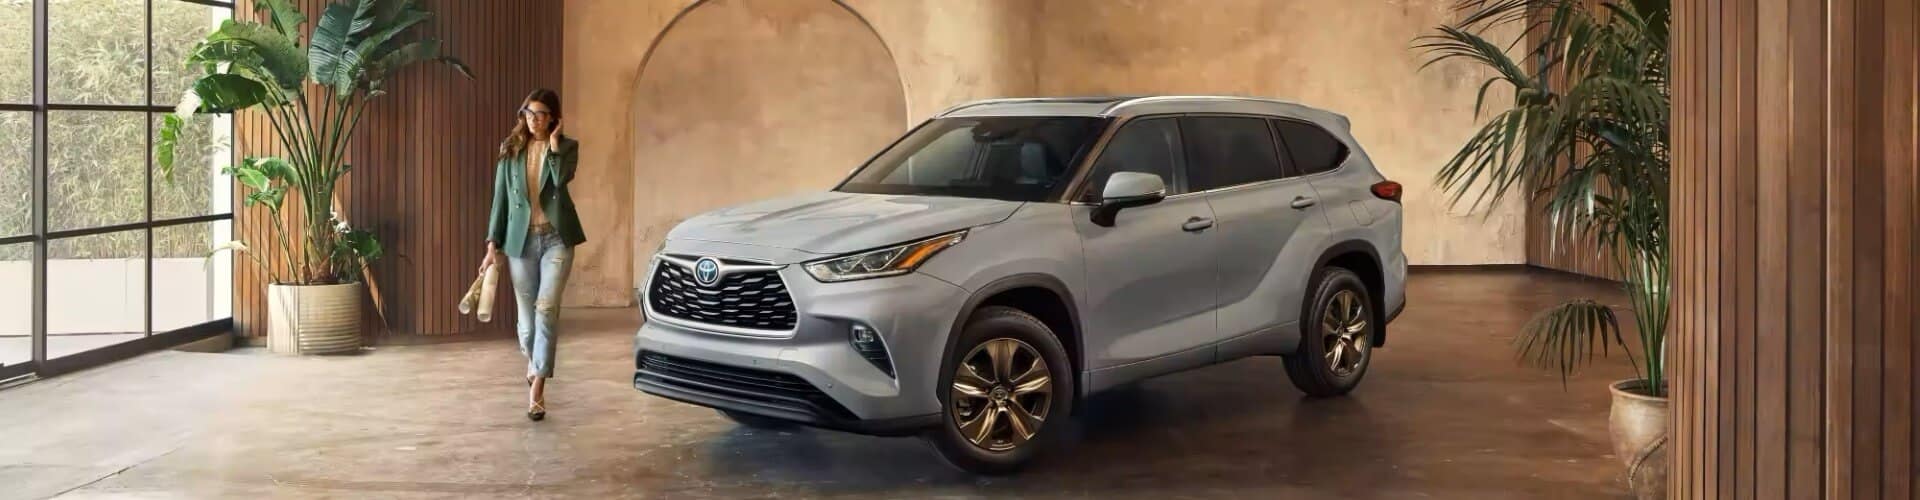 The Future of SUVs: A Sneak Peek into the High-Tech Features of the 2023 Toyota Highlander Hybrid - Intelligent driver-assistance technologies